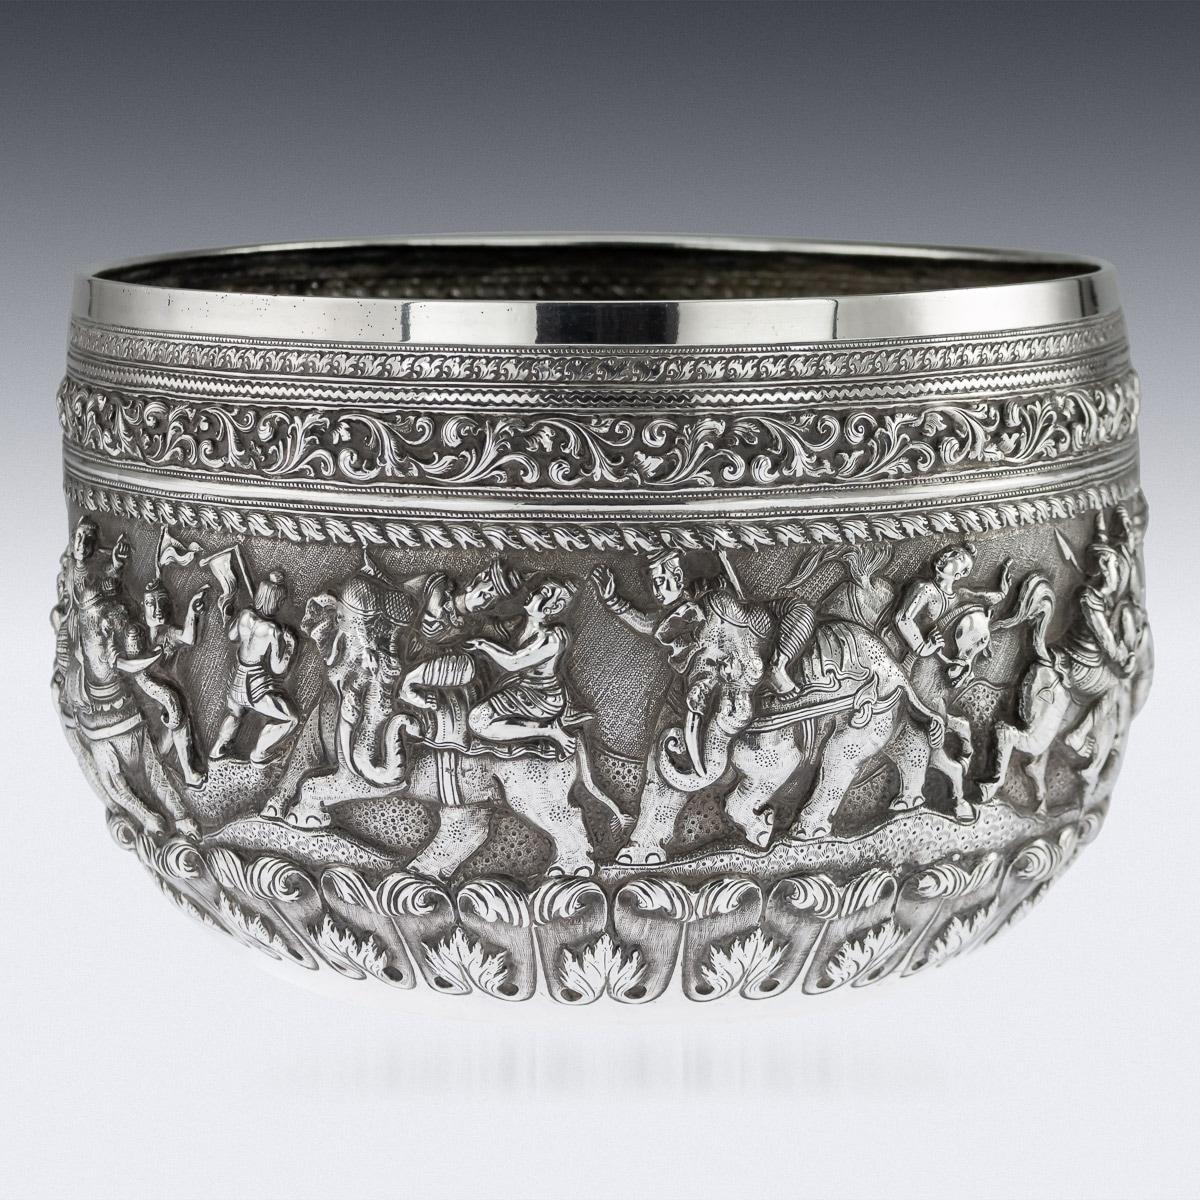 Antique late-19th century exceptionally rare Burmese, Myanmar solid silver Thabeik bowl, repousse' decorated in high relief depicting battle scenes and traditional scenes from the Burmese mythology, detailed figures set against a chiseled matted